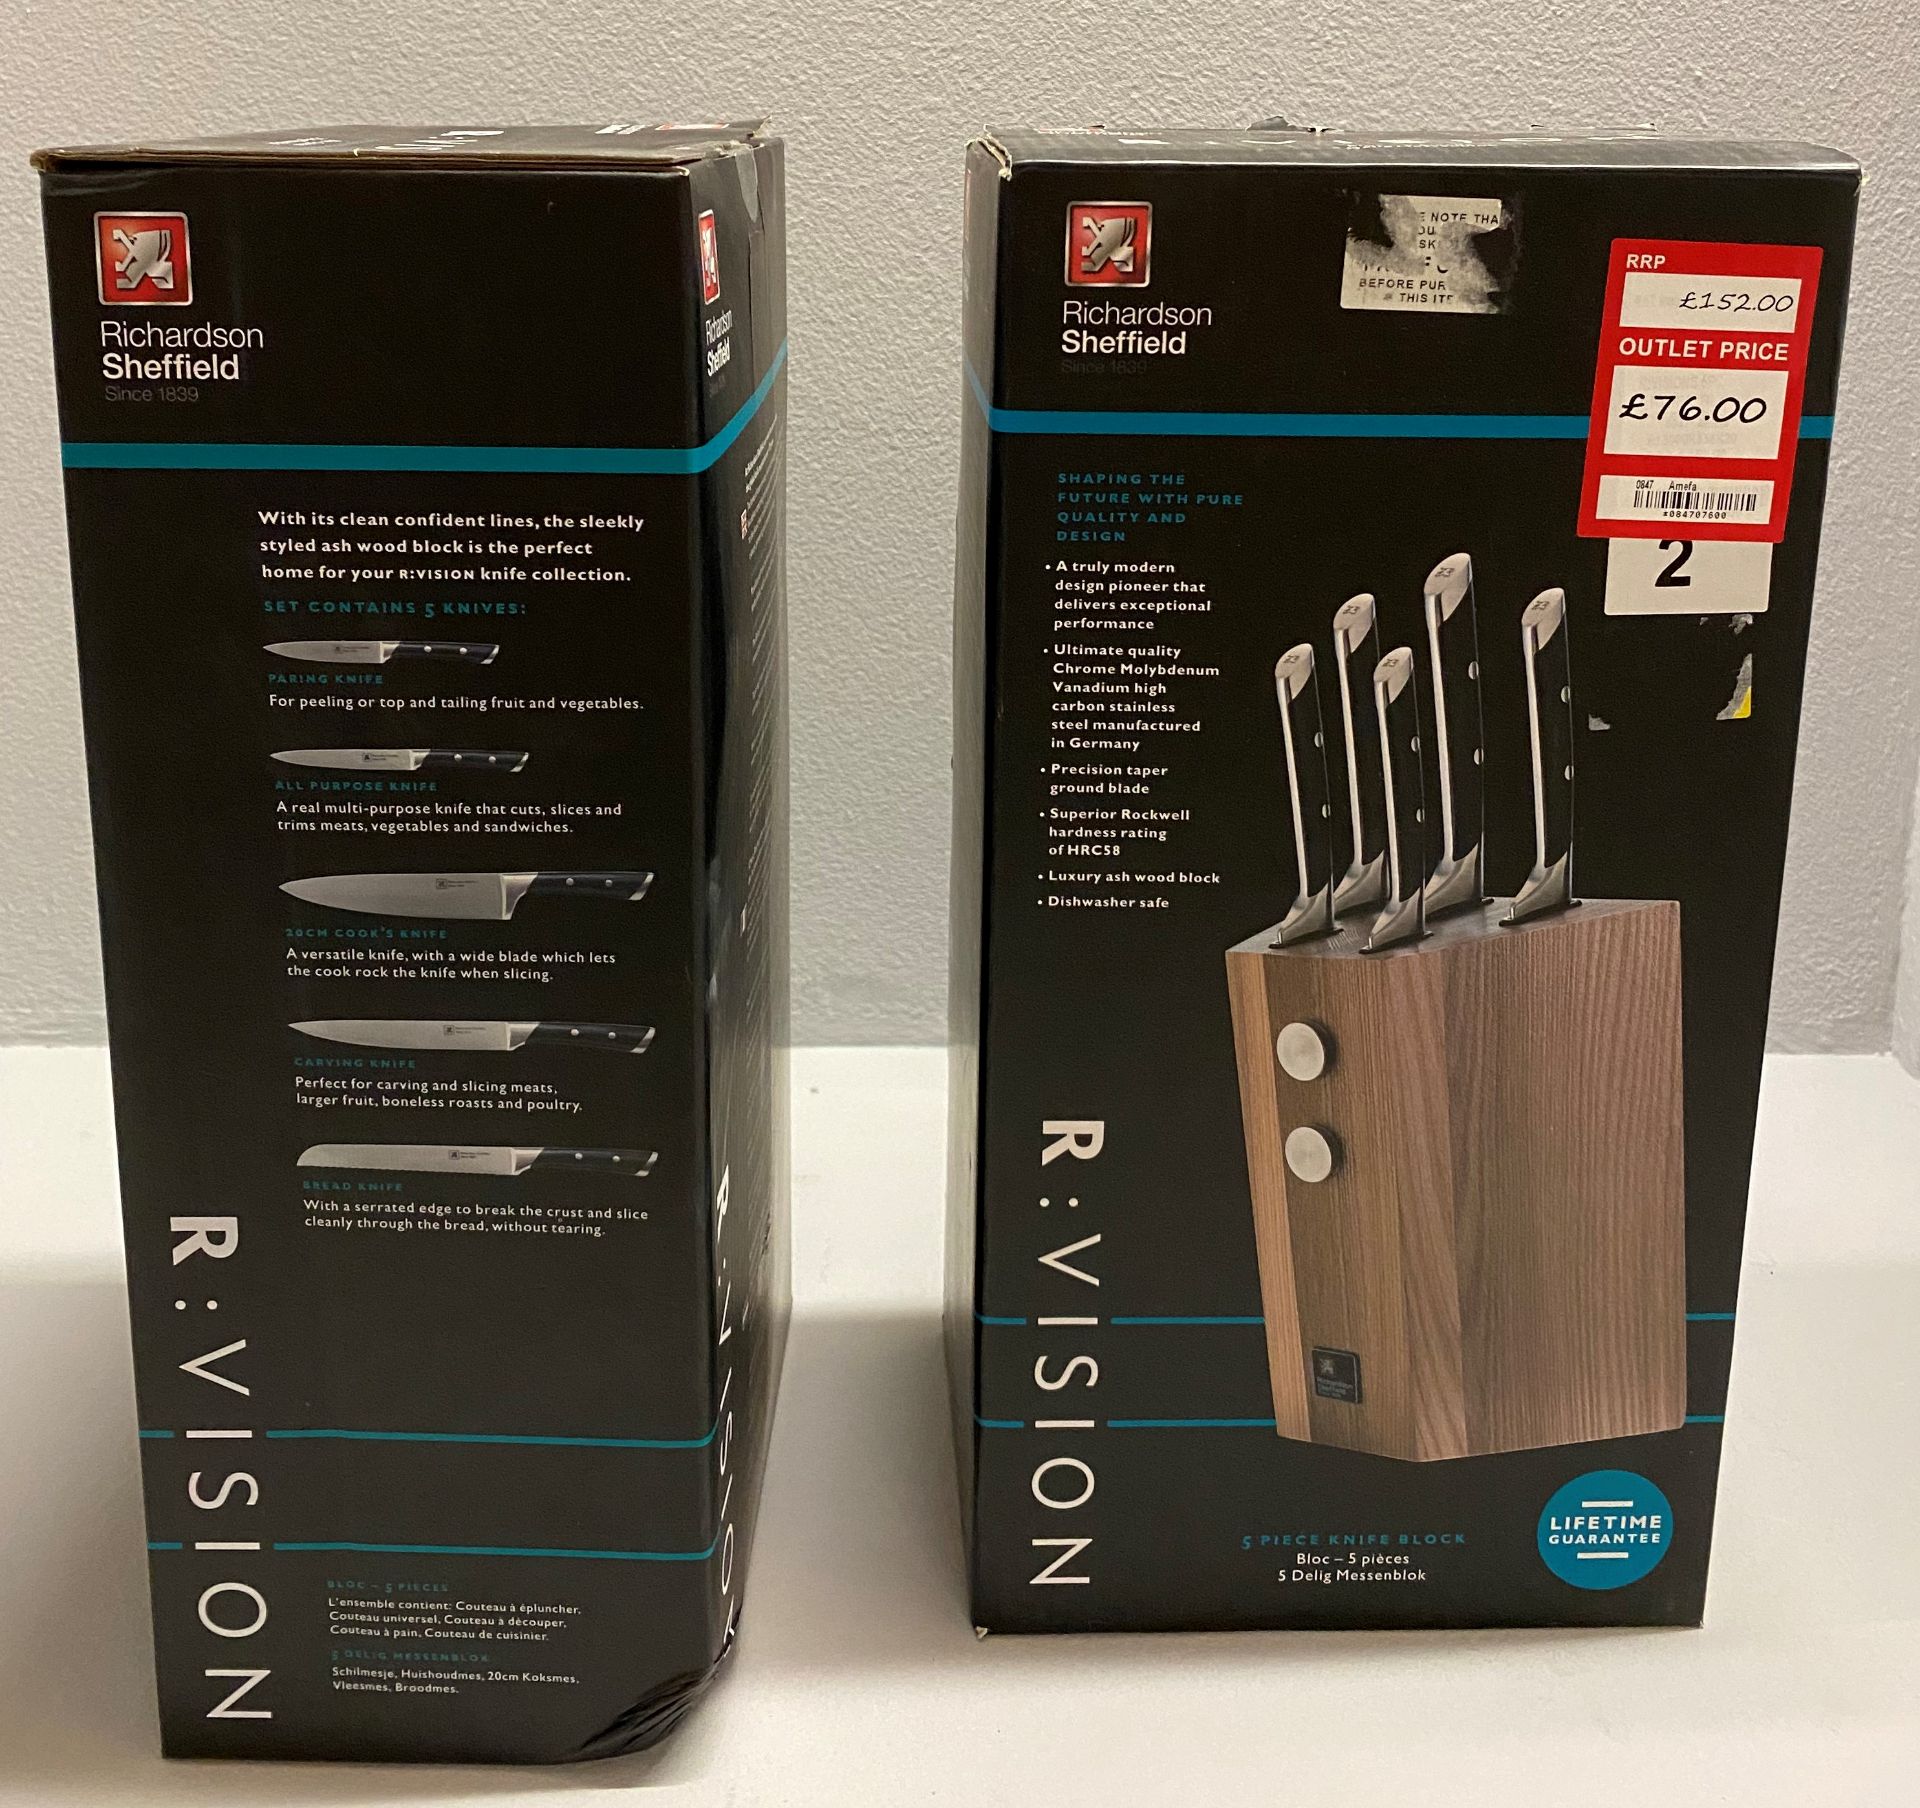 2 x Richardson Sheffield R:VISION 5 piece stainless steel knife block set RRP £152. - Image 2 of 2